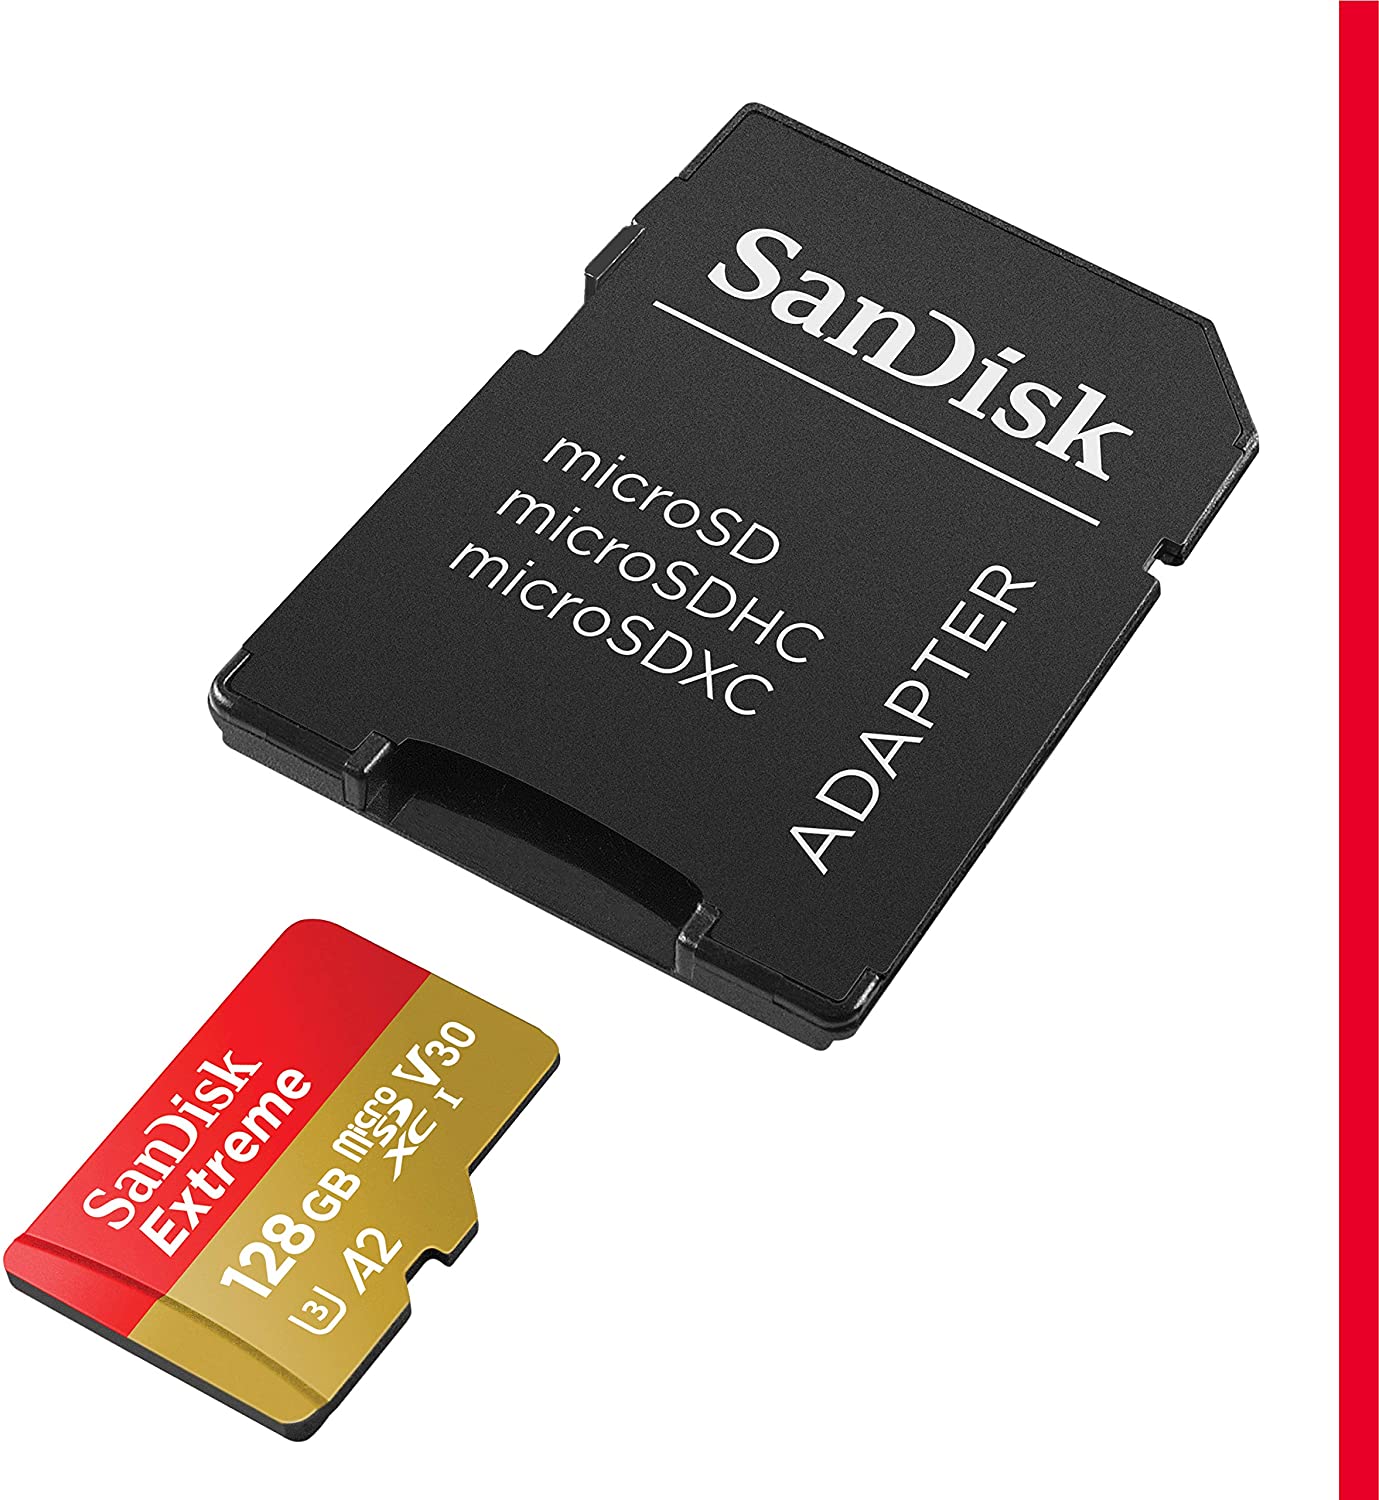 Extreme SD card, 128GB with Adapter - CamDo Solutions